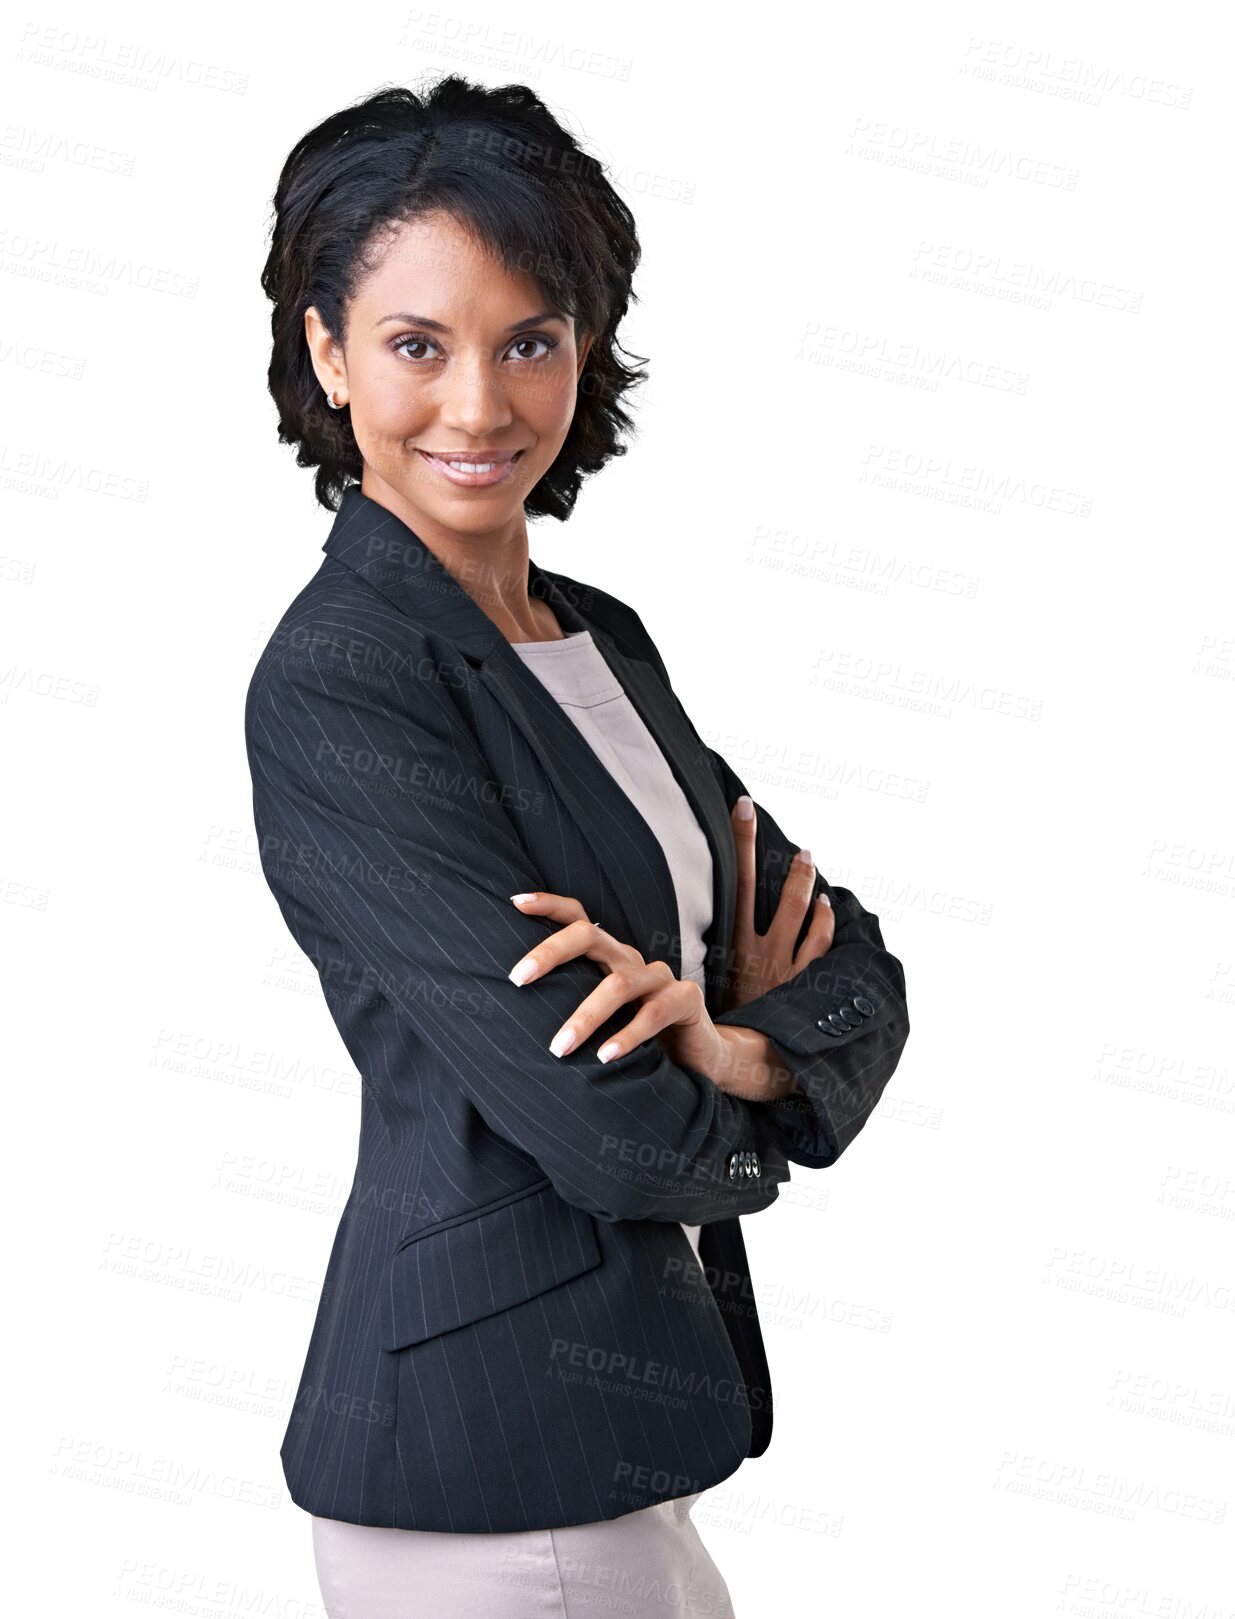 Buy stock photo Portrait, accountant and woman with arms crossed isolated on a transparent png background. Confidence, professional and happy entrepreneur, auditor and person from Brazil with pride for business.